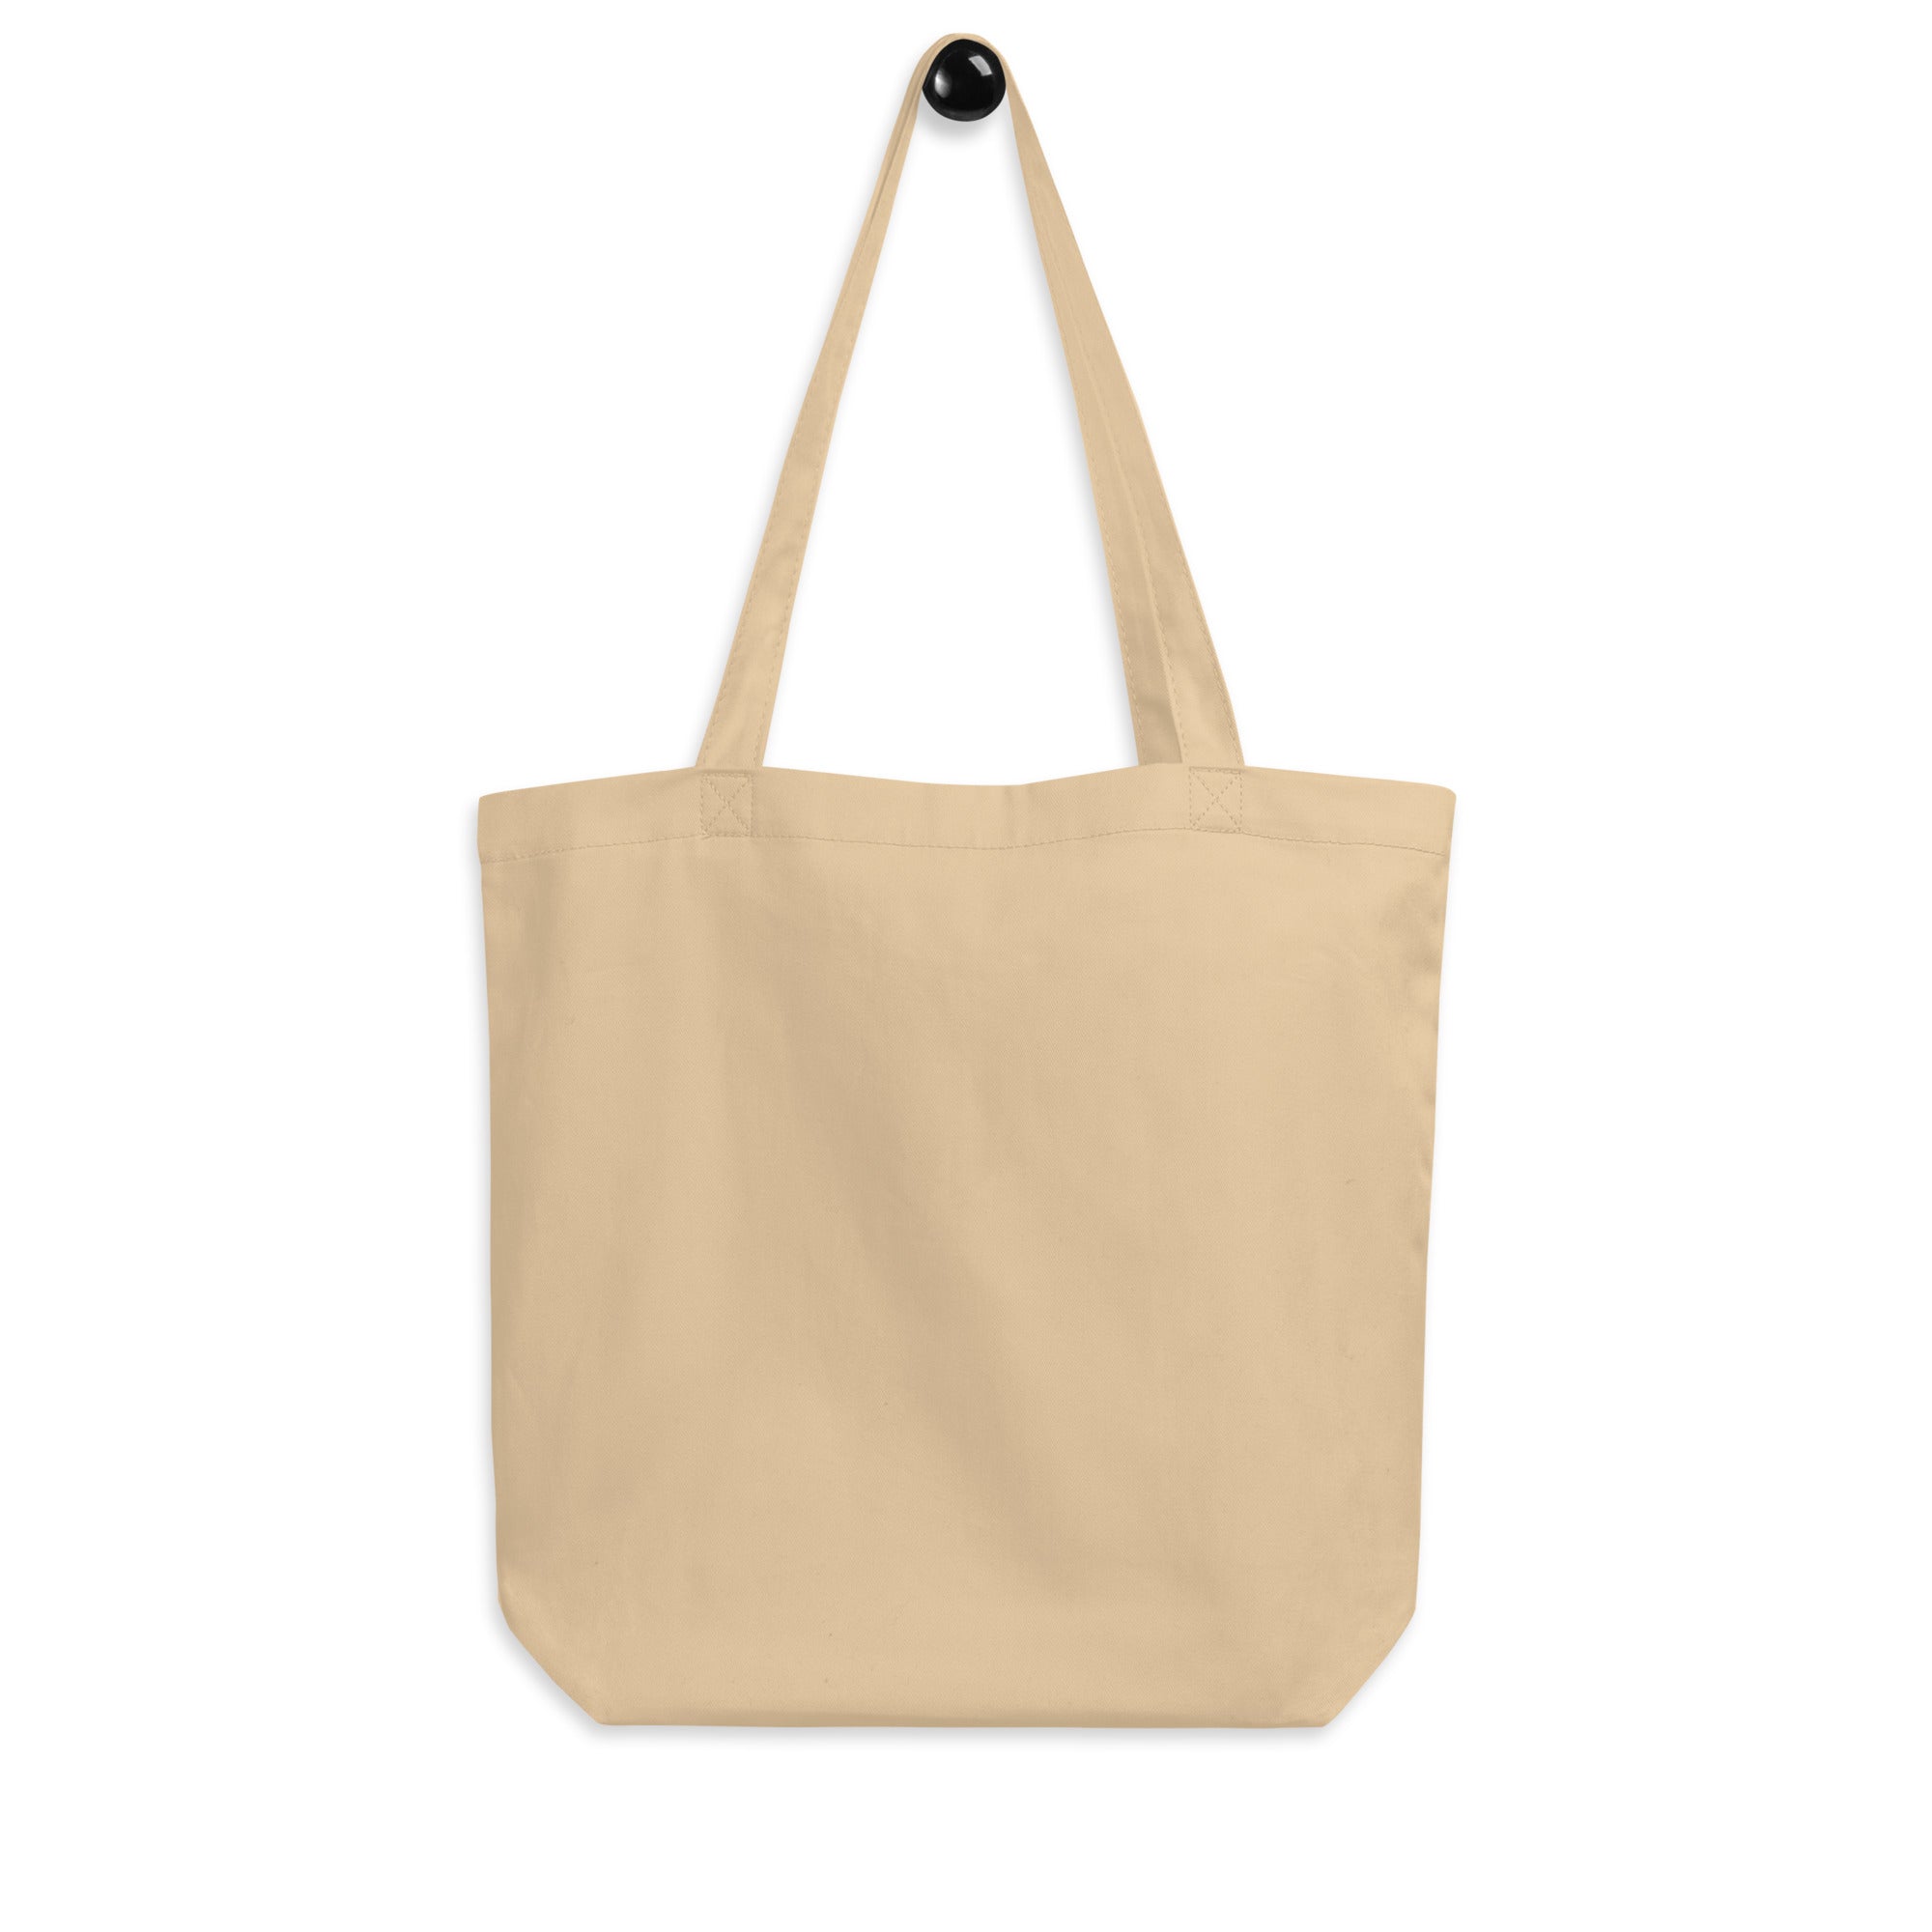 Ho in Holy - Eco Tote Bag